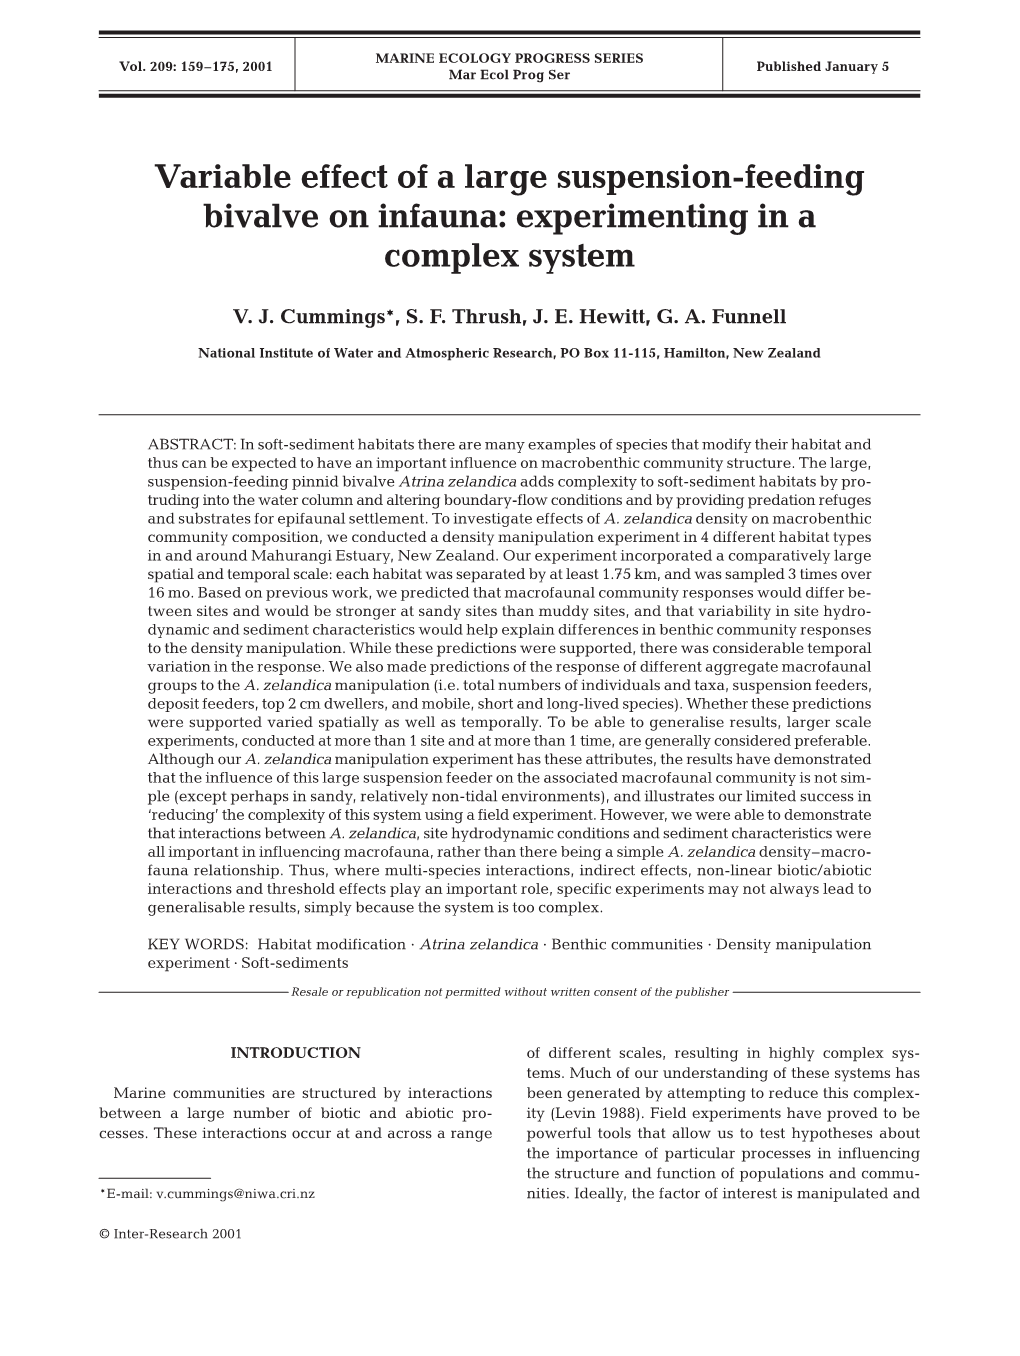 Variable Effect of a Large Suspension-Feeding Bivalve on Infauna: Experimenting in a Complex System